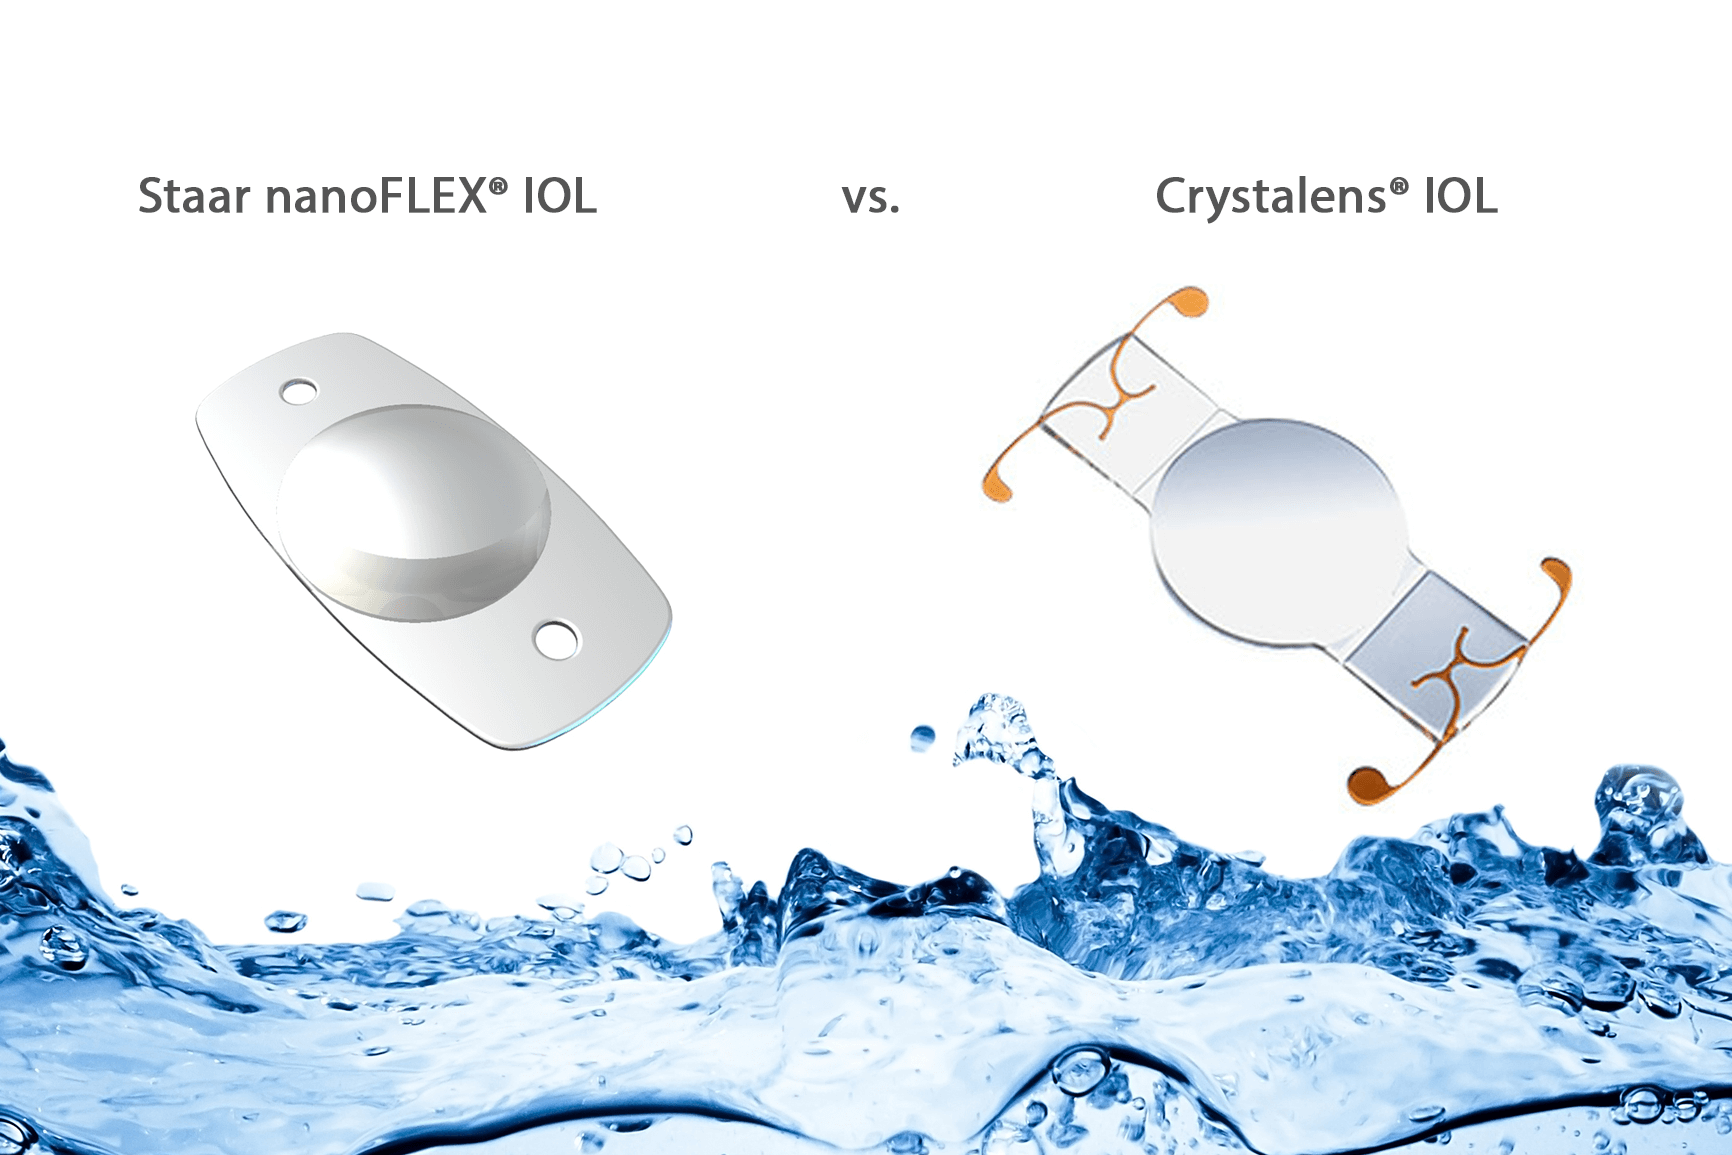 Advantages of the Staar nanoFLEX® IOL over The Crystalens® IOL